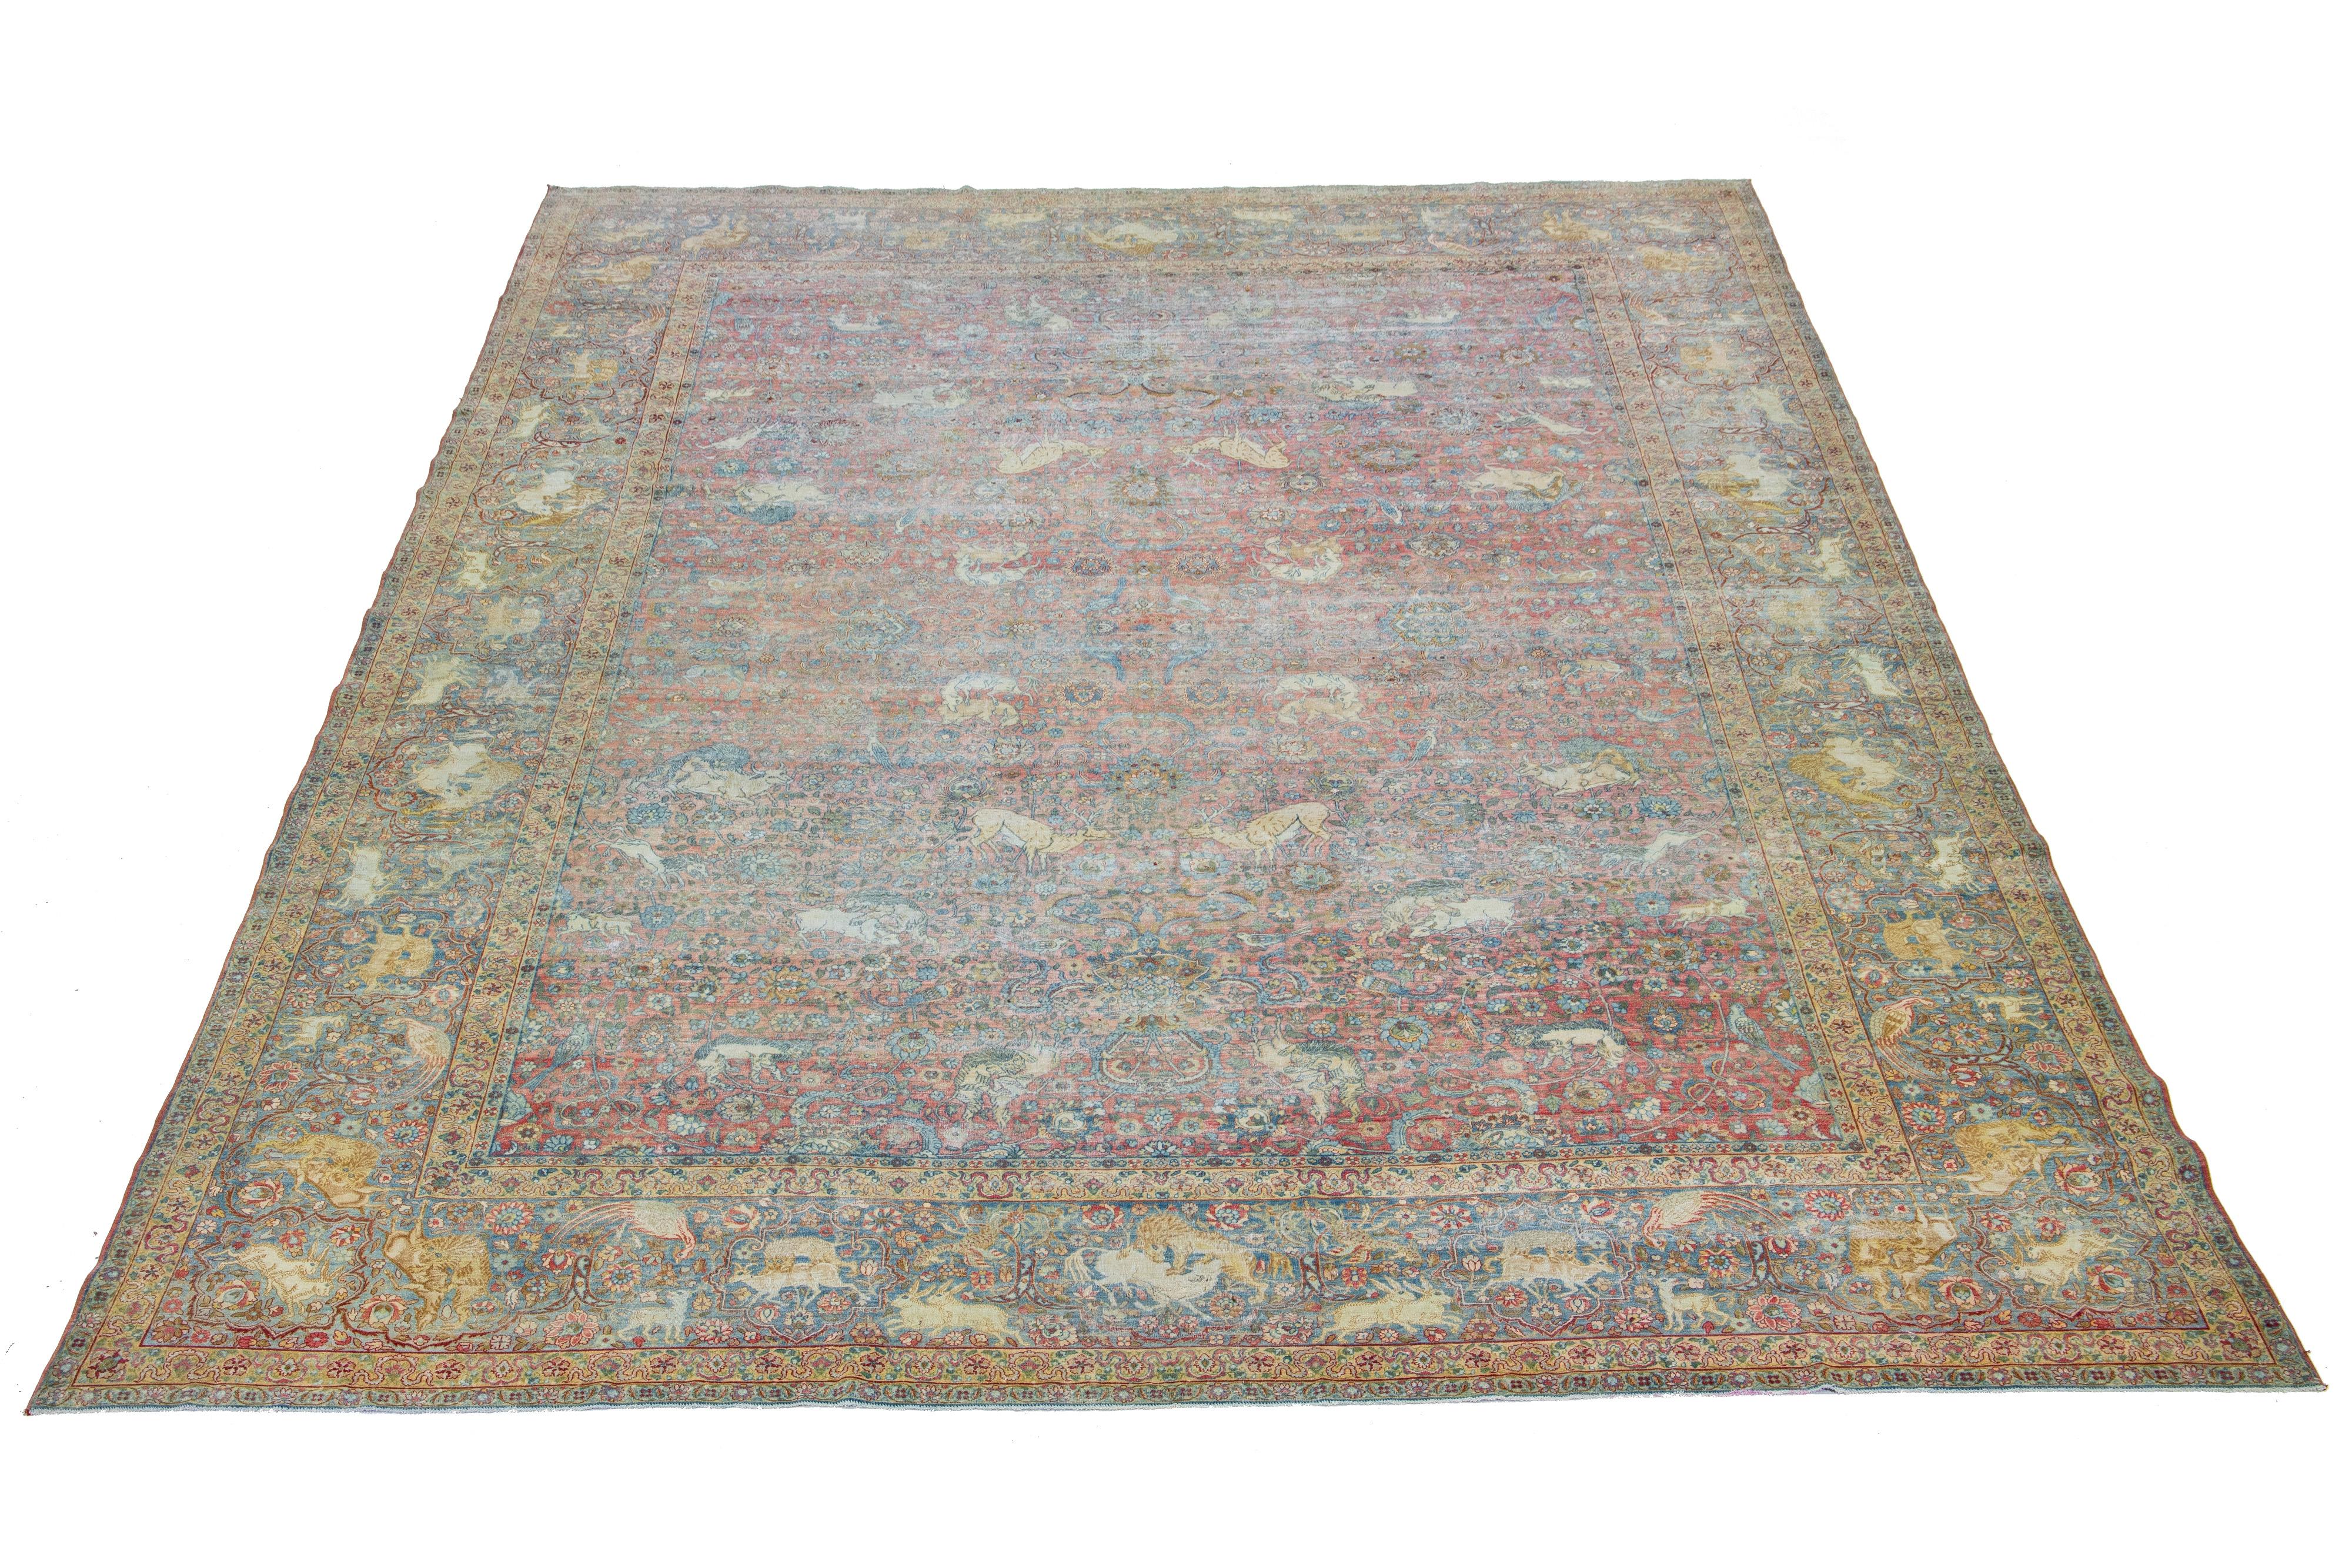 This Persian Tabriz wool rug, handcrafted, showcases a traditional floral pattern. The contrast between the red-rust backdrop emphasizes the blue floral design.

This rug measures 12'10